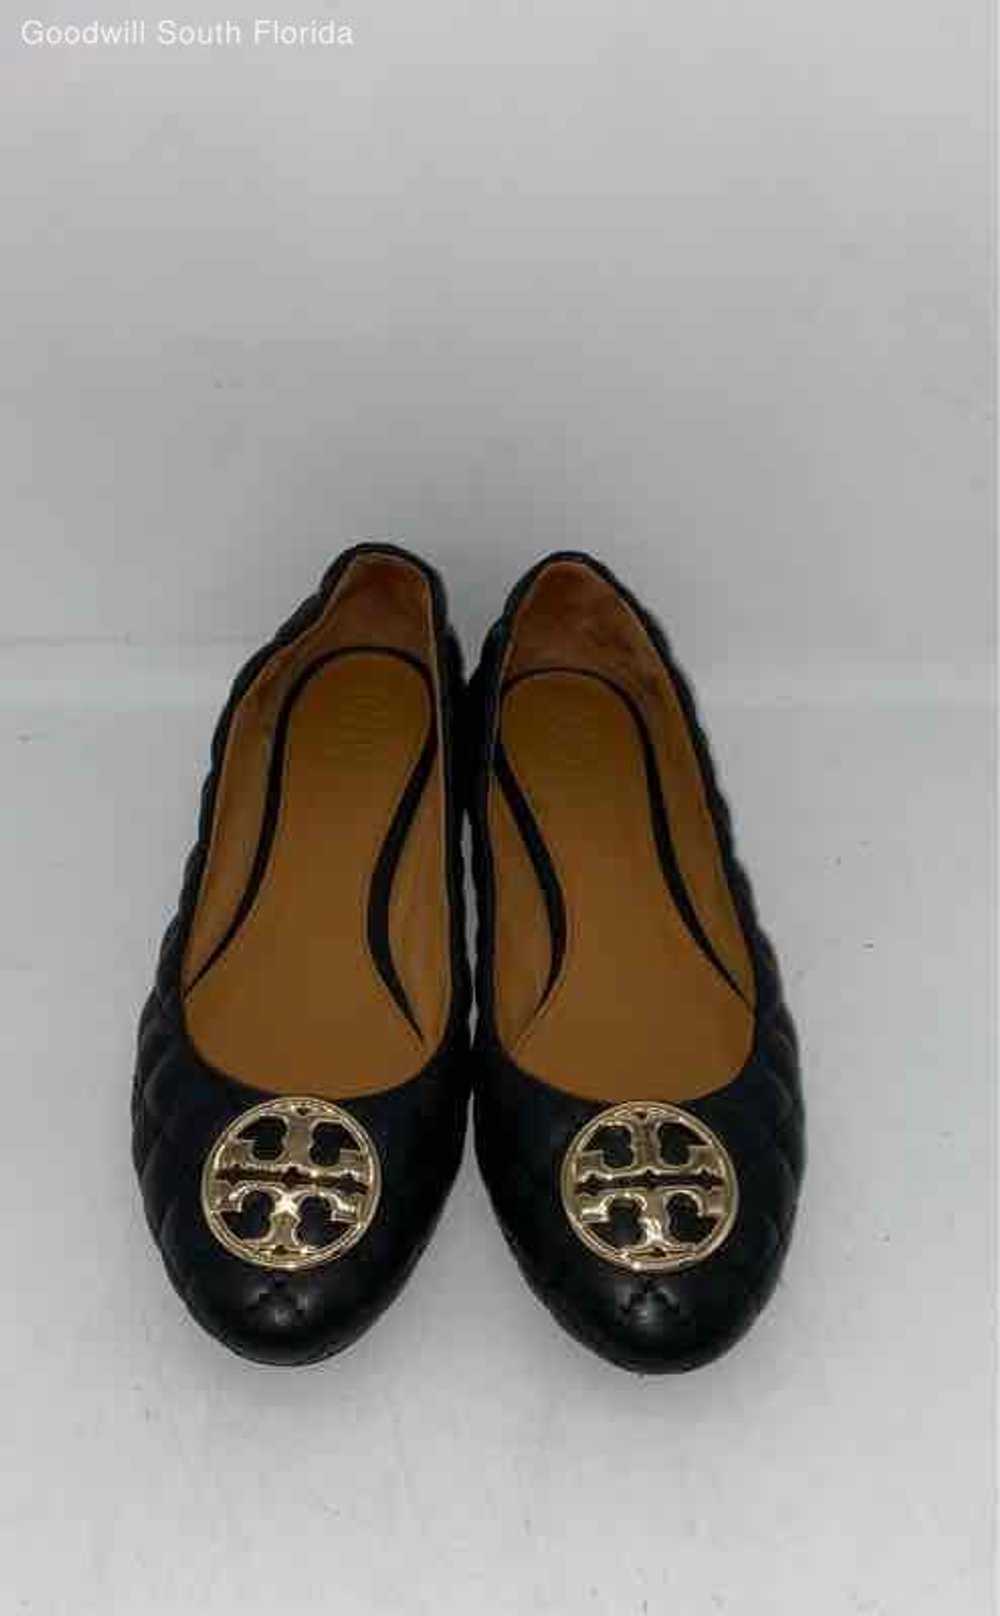 Tory Burch Womens Black Shoes Size 7.5M - image 3